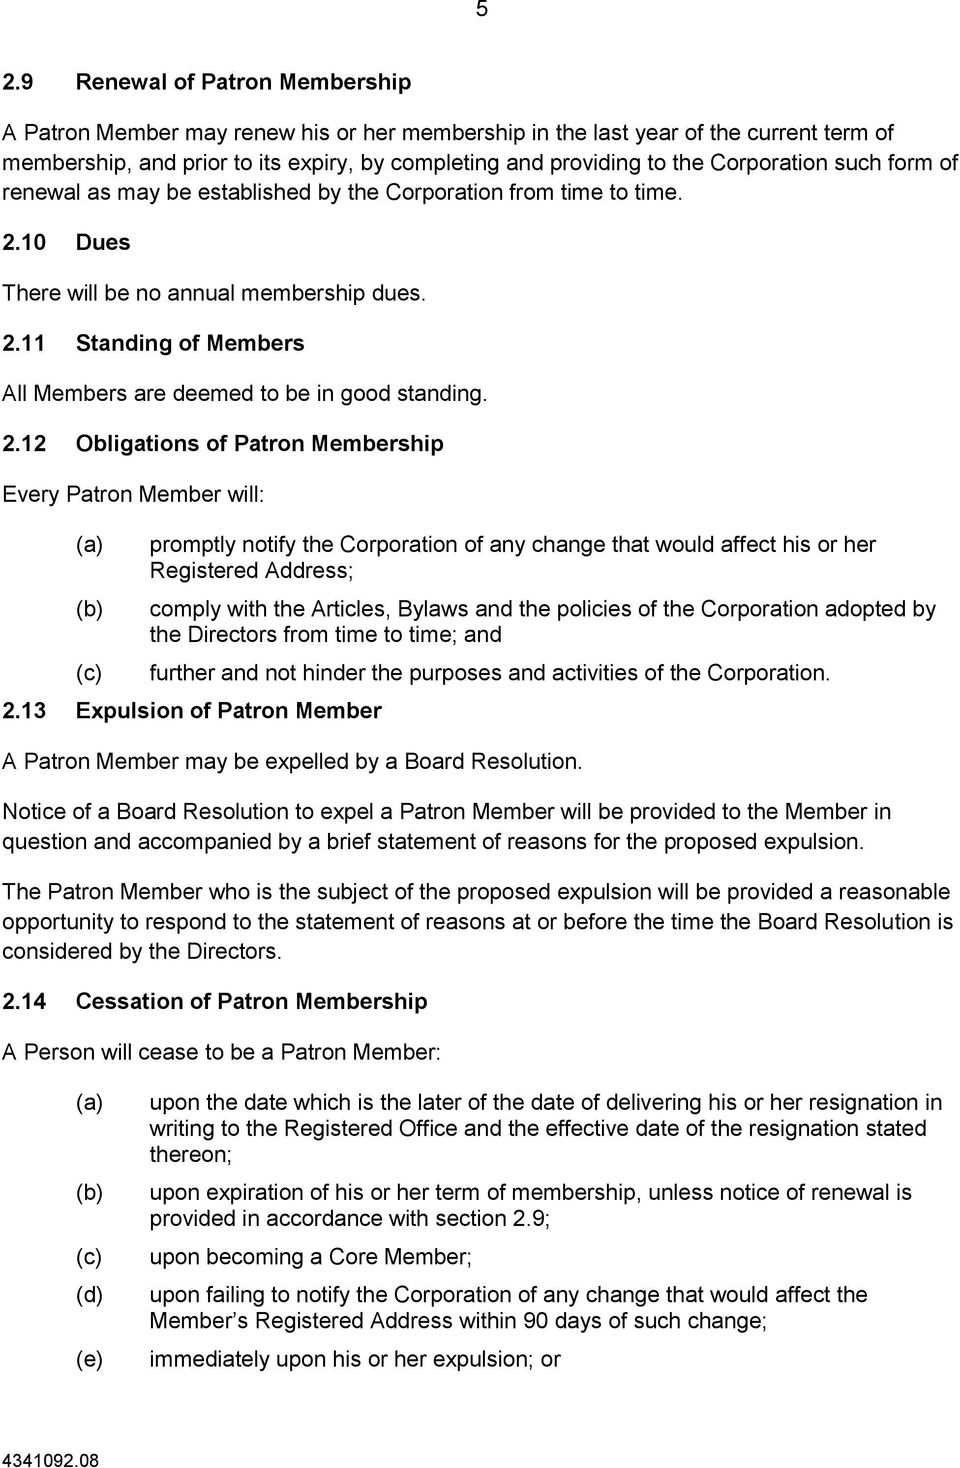 2.12 Obligations of Patron Membership Every Patron Member will: (c) promptly notify the Corporation of any change that would affect his or her Registered Address; comply with the Articles, Bylaws and